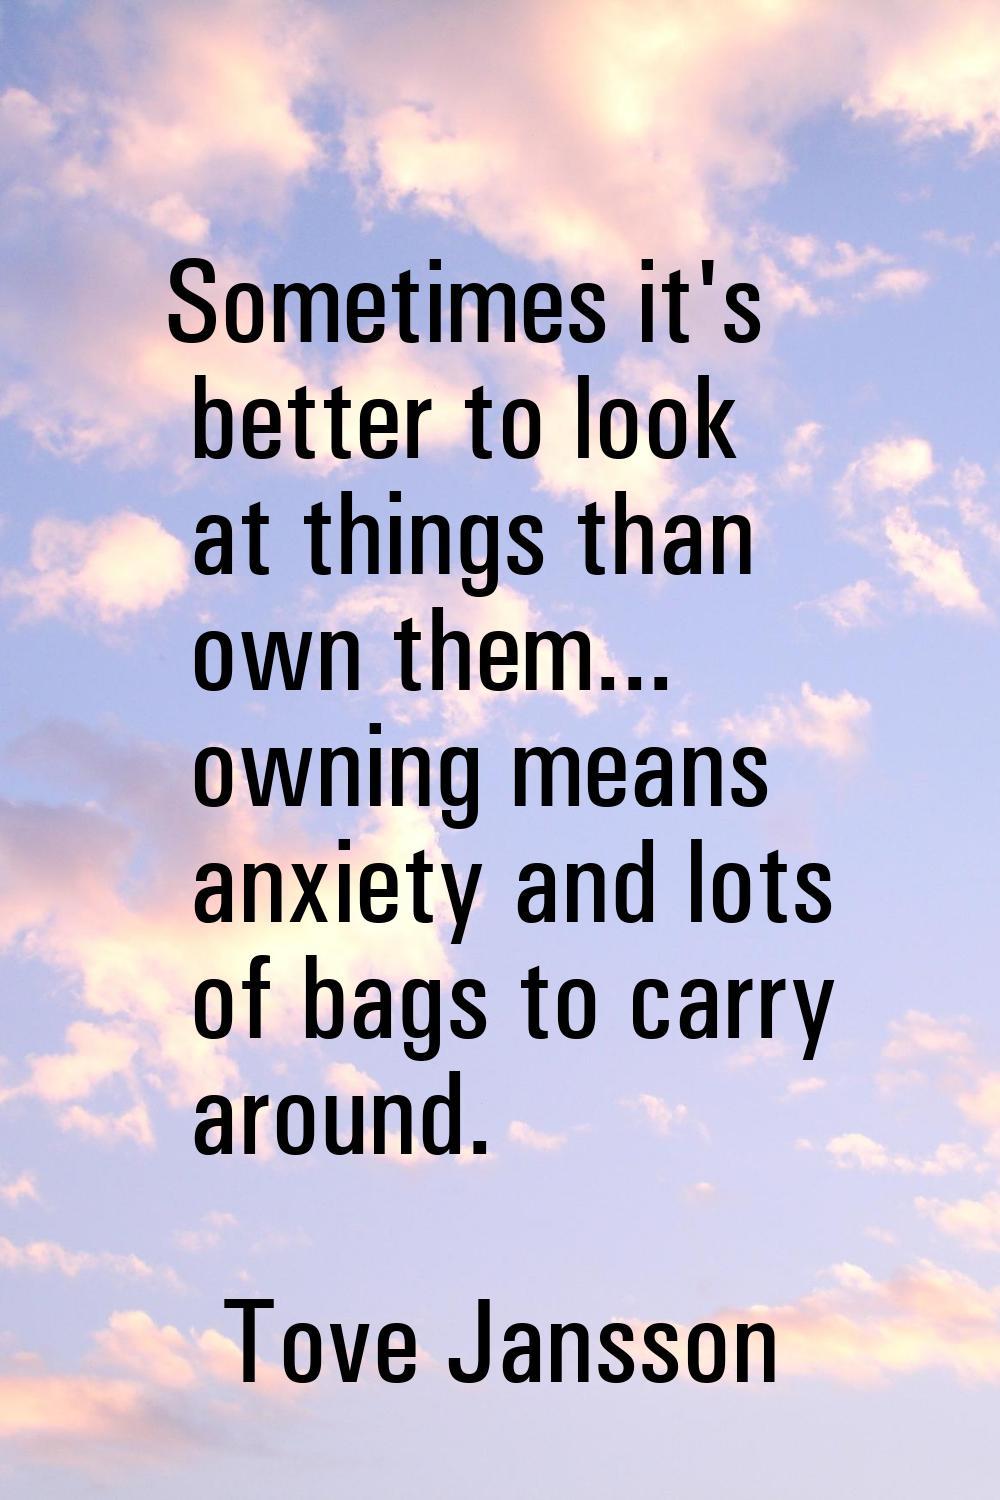 Sometimes it's better to look at things than own them... owning means anxiety and lots of bags to c